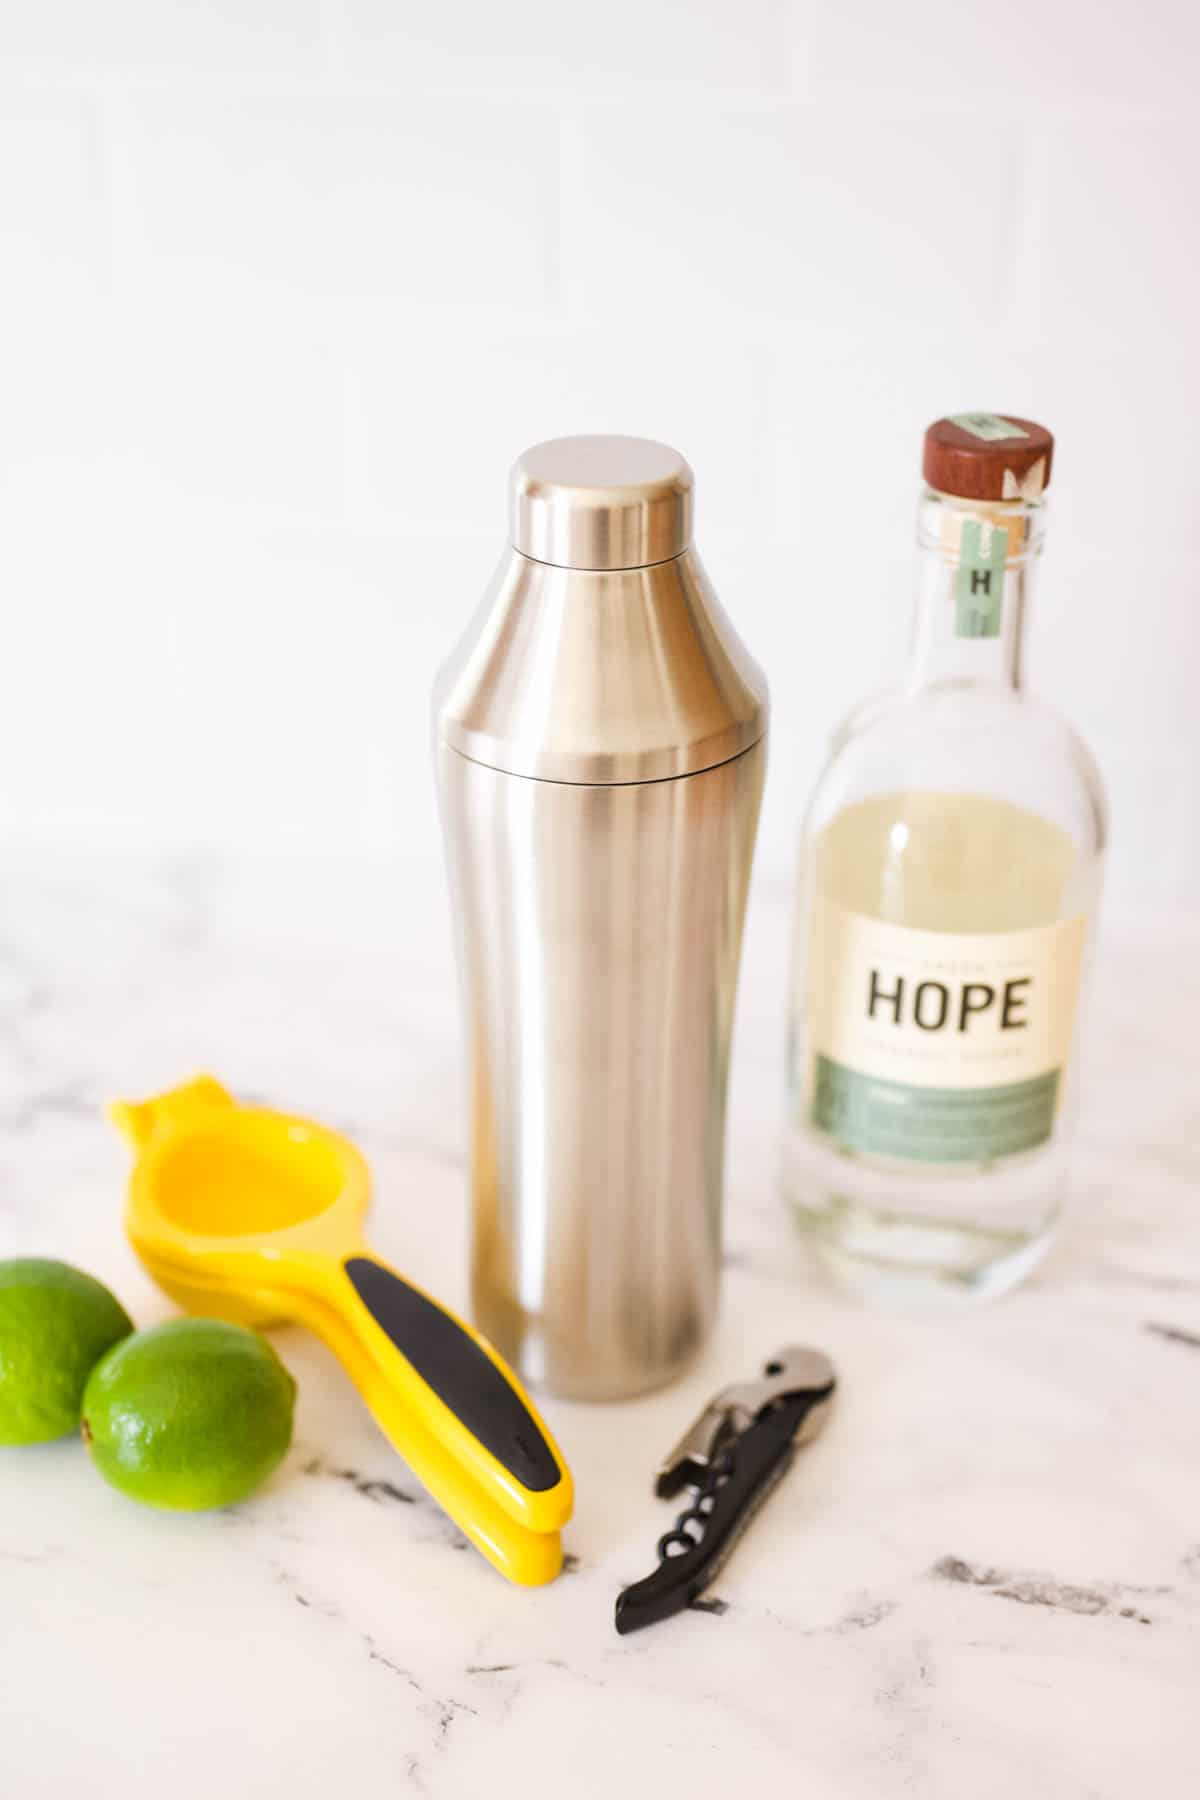 The Boston Shaker: A Classic Tool for Every Home Bartender • A Bar Above